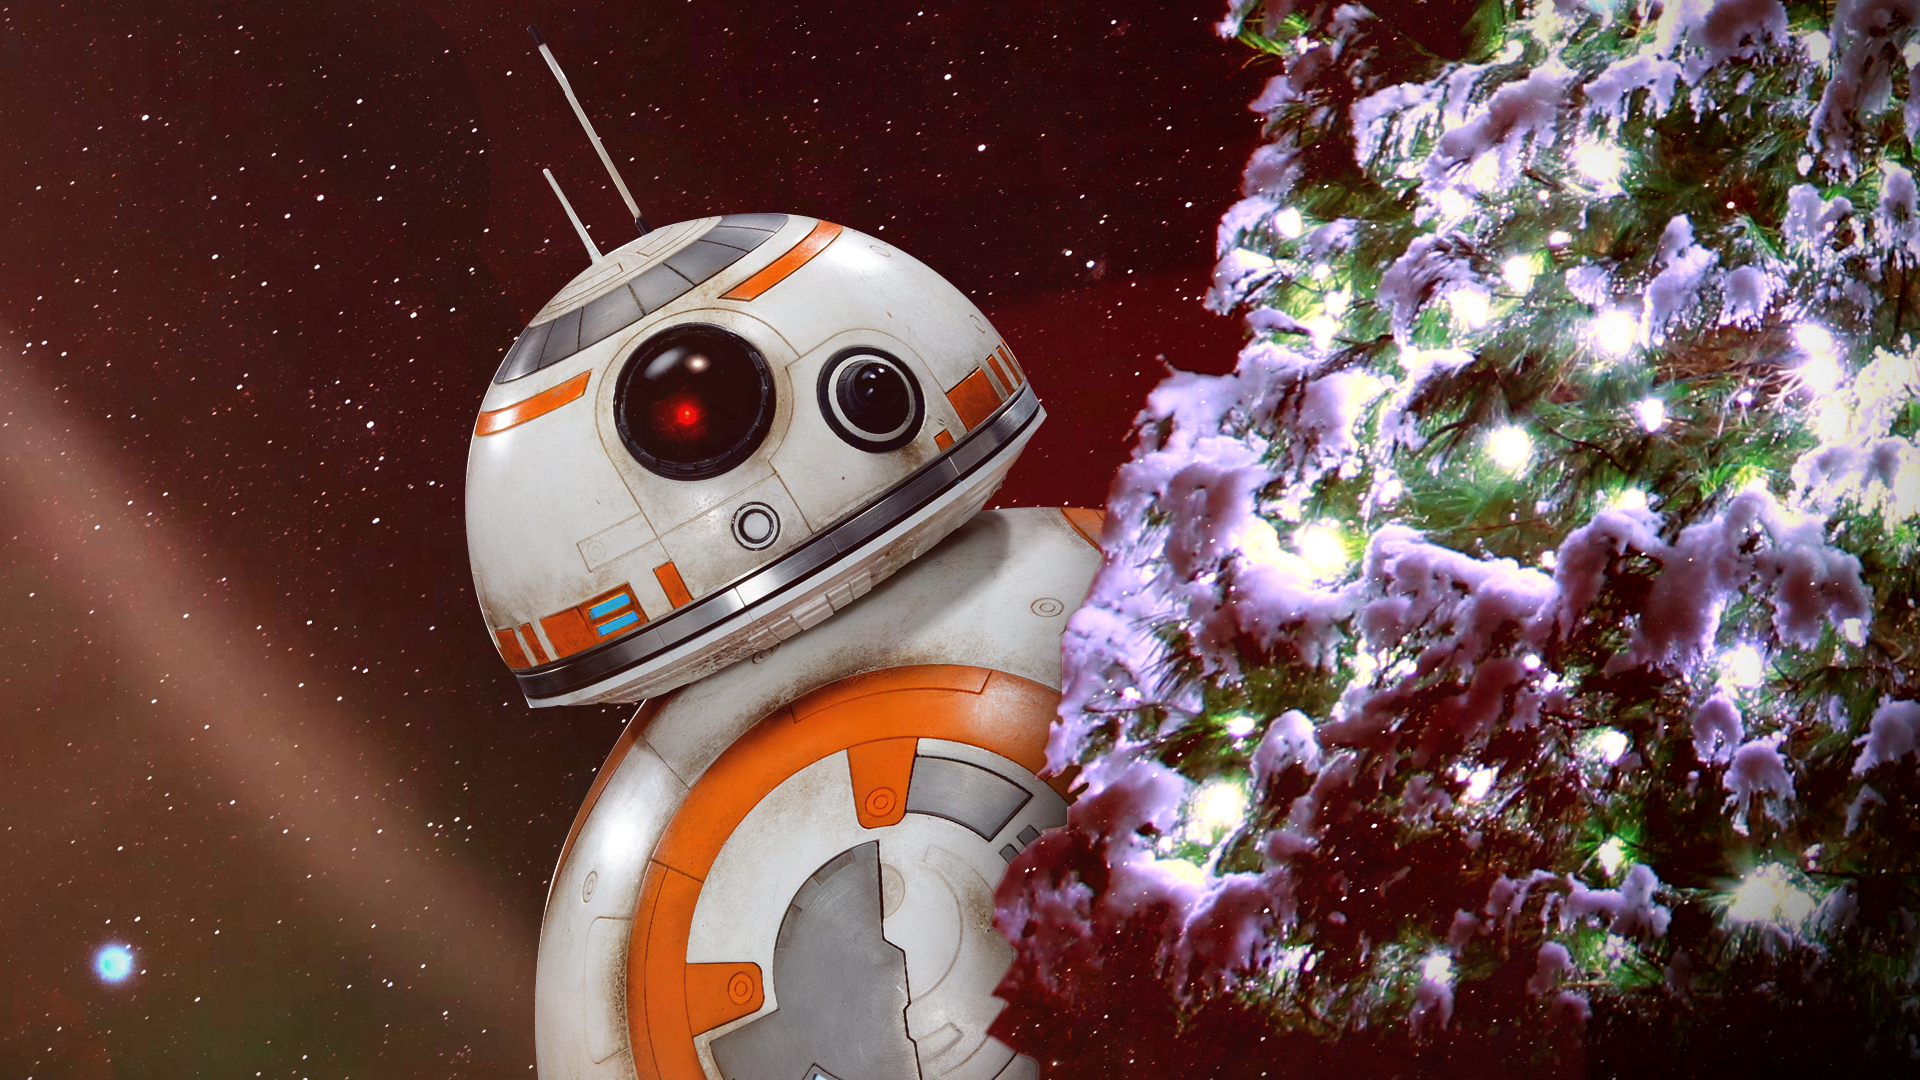 star wars christmas wallpaper,outer space,space,spacecraft,technology,vehicle